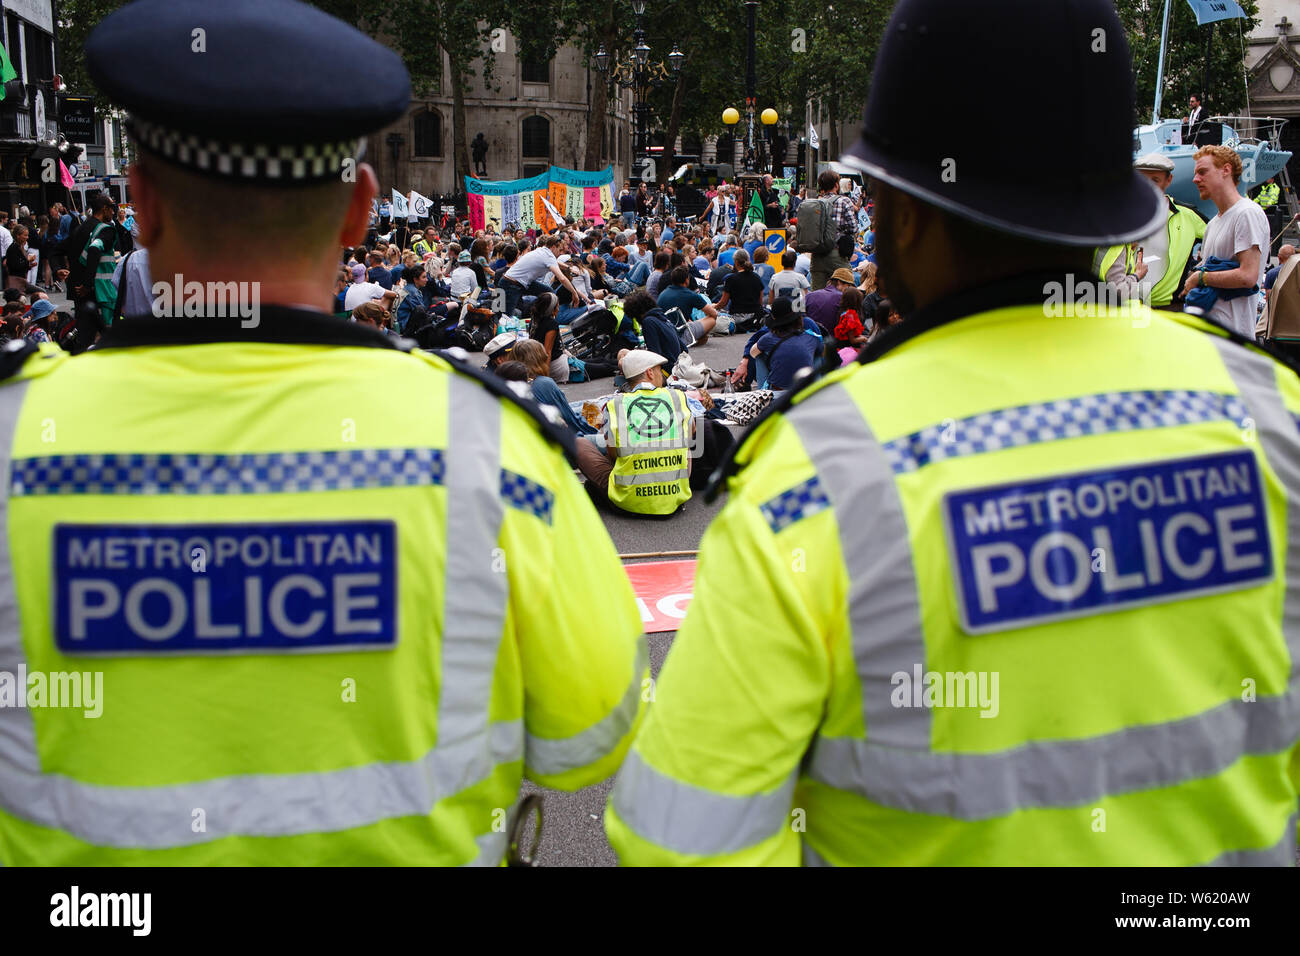 July 15, 2019, London, United Kingdom: Police officers keep watch as members and supporters of climate change activist group Extinction Rebellion take part in the opening day of the group's 'Summer Uprising' demonstration outside the Royal Courts of Justice in London. Demonstrations were also held in Bristol, Cardiff, Leeds and Glasgow. Among their demands for greater action on climate change, protesters are calling for 'ecocide' (i.e. the destruction of ecosystems) to be made a criminal act. The centrepiece of the London protest, a blue boat, the 'Polly Higgins', is named after the late envir Stock Photo